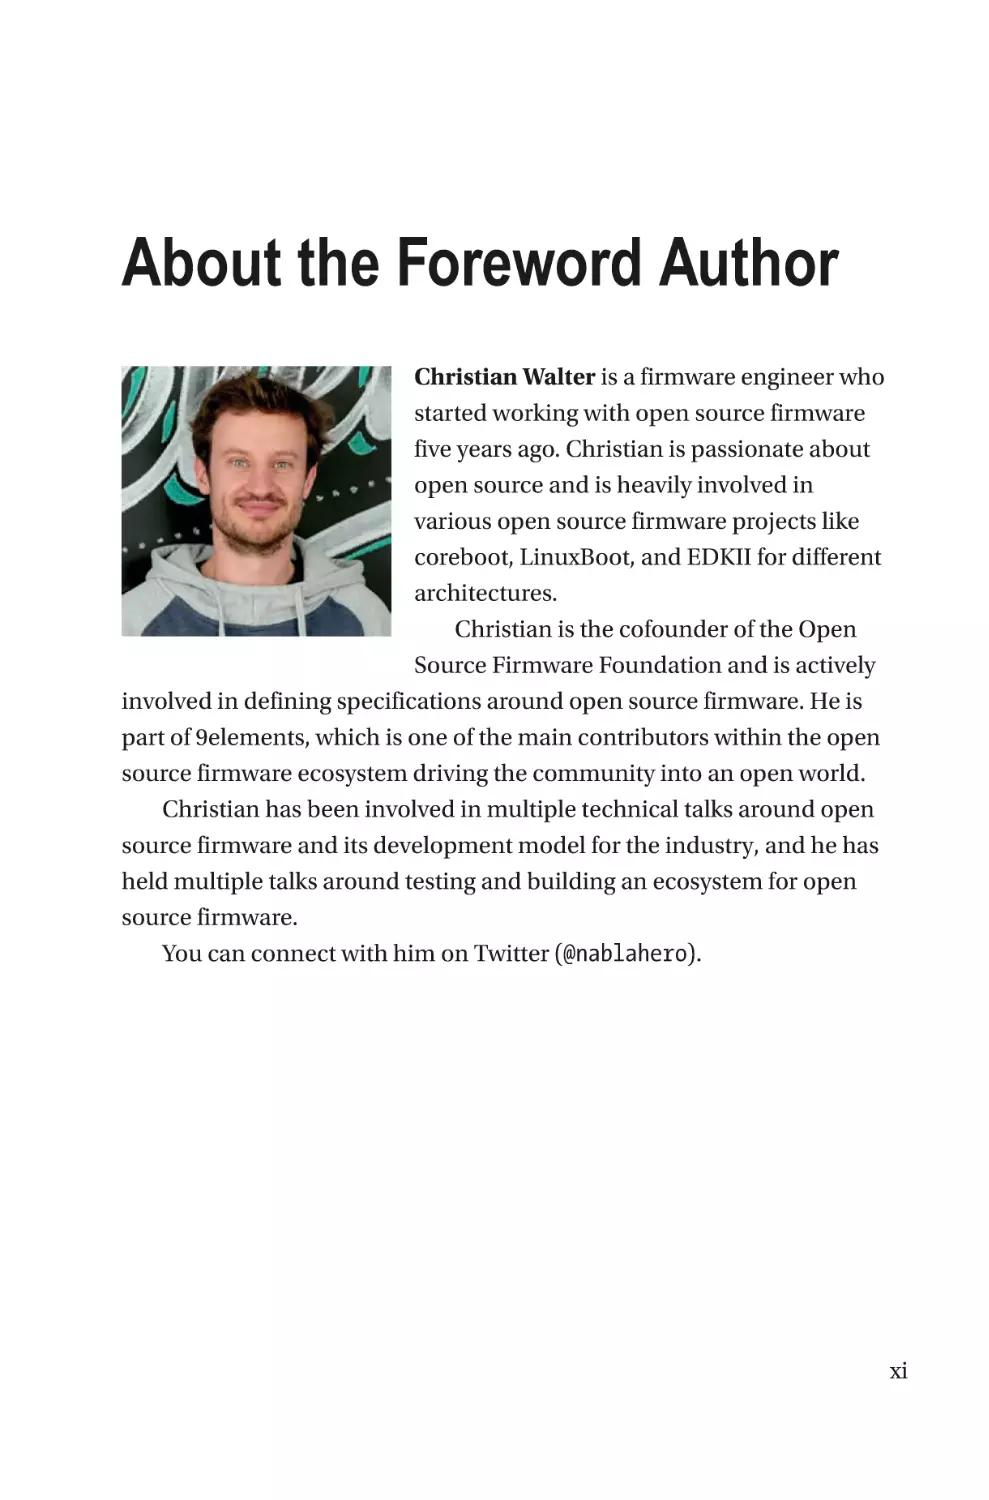 About the Foreword Author